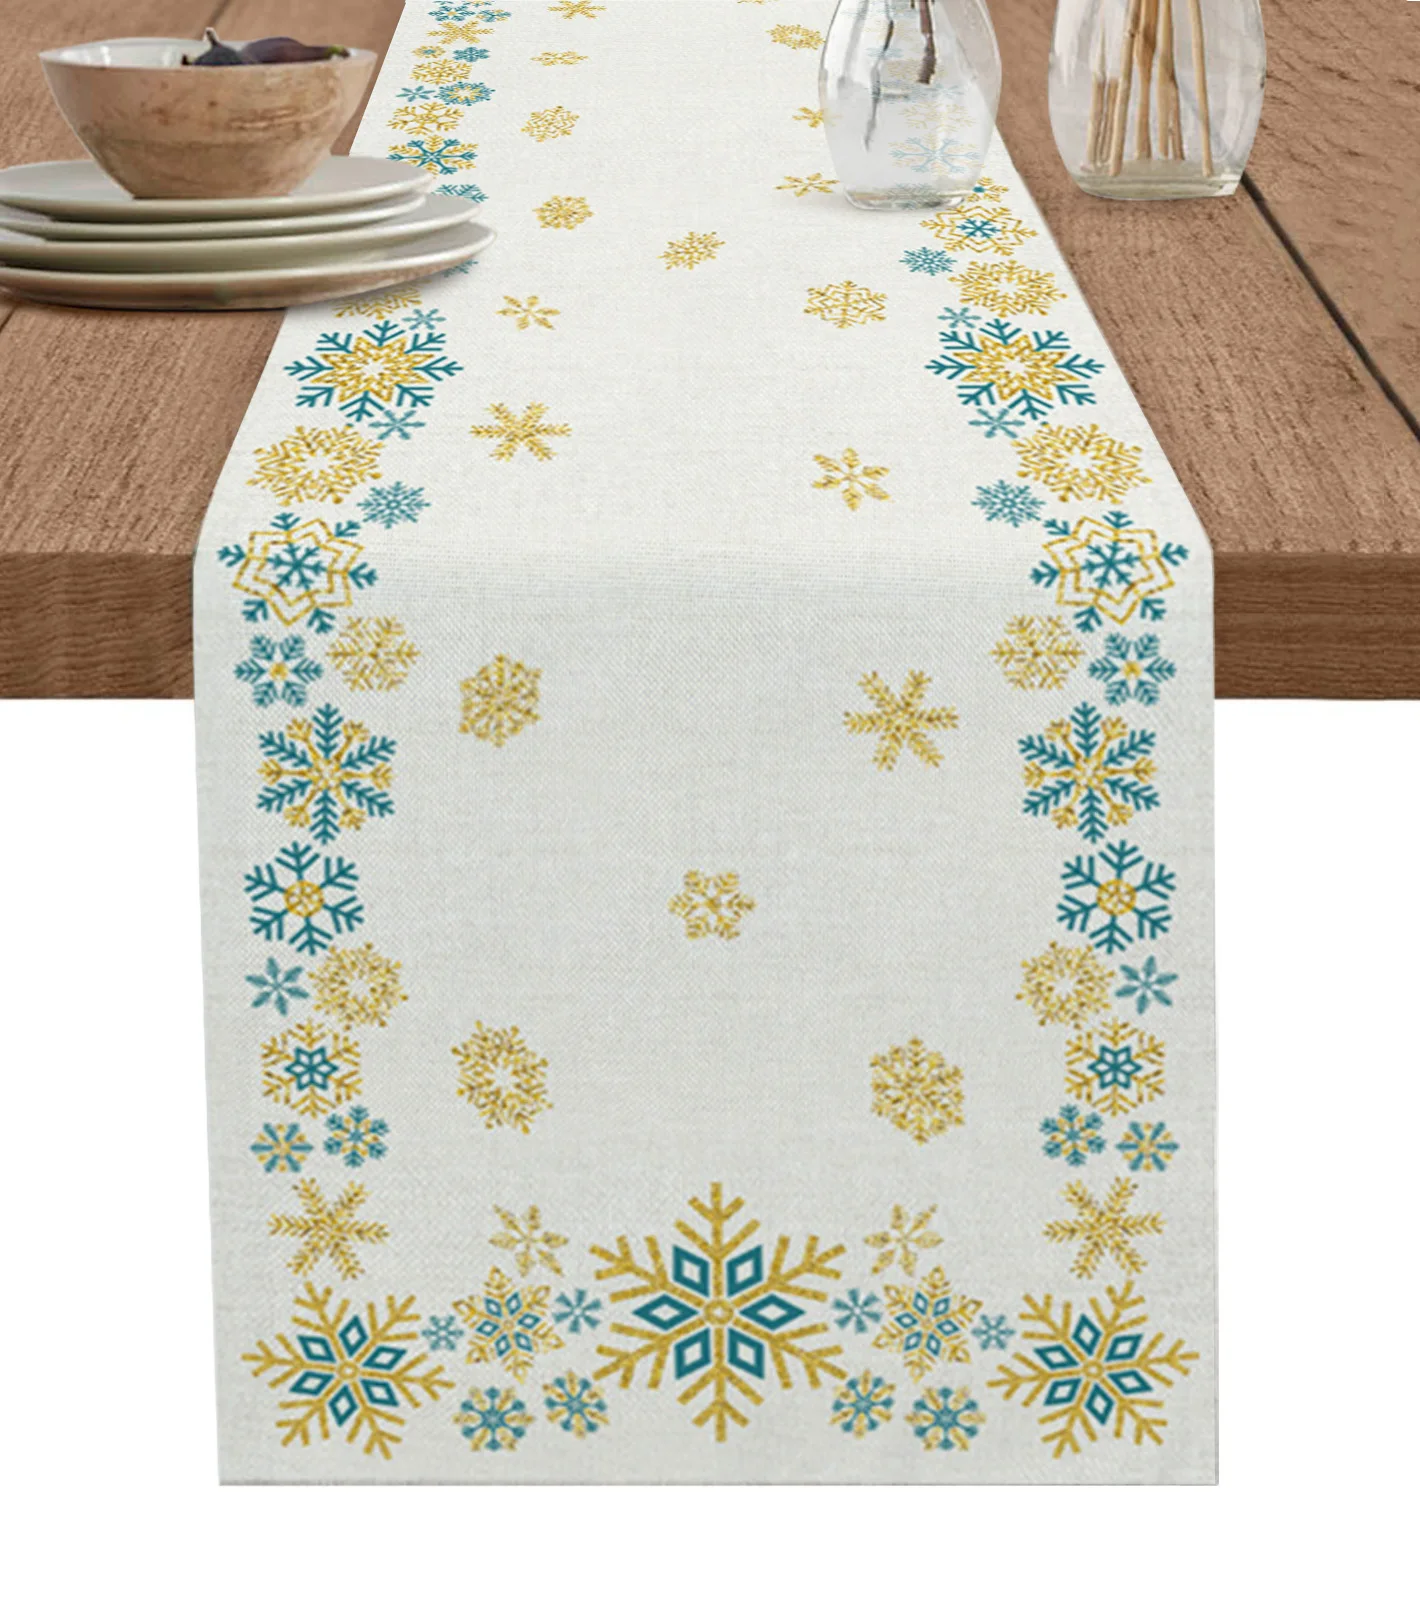 

Christmas Winter Snowflakes Table Runner Home Wedding Table Flag Mat Table Centerpieces Decoration Party Dining Long Tablecloth